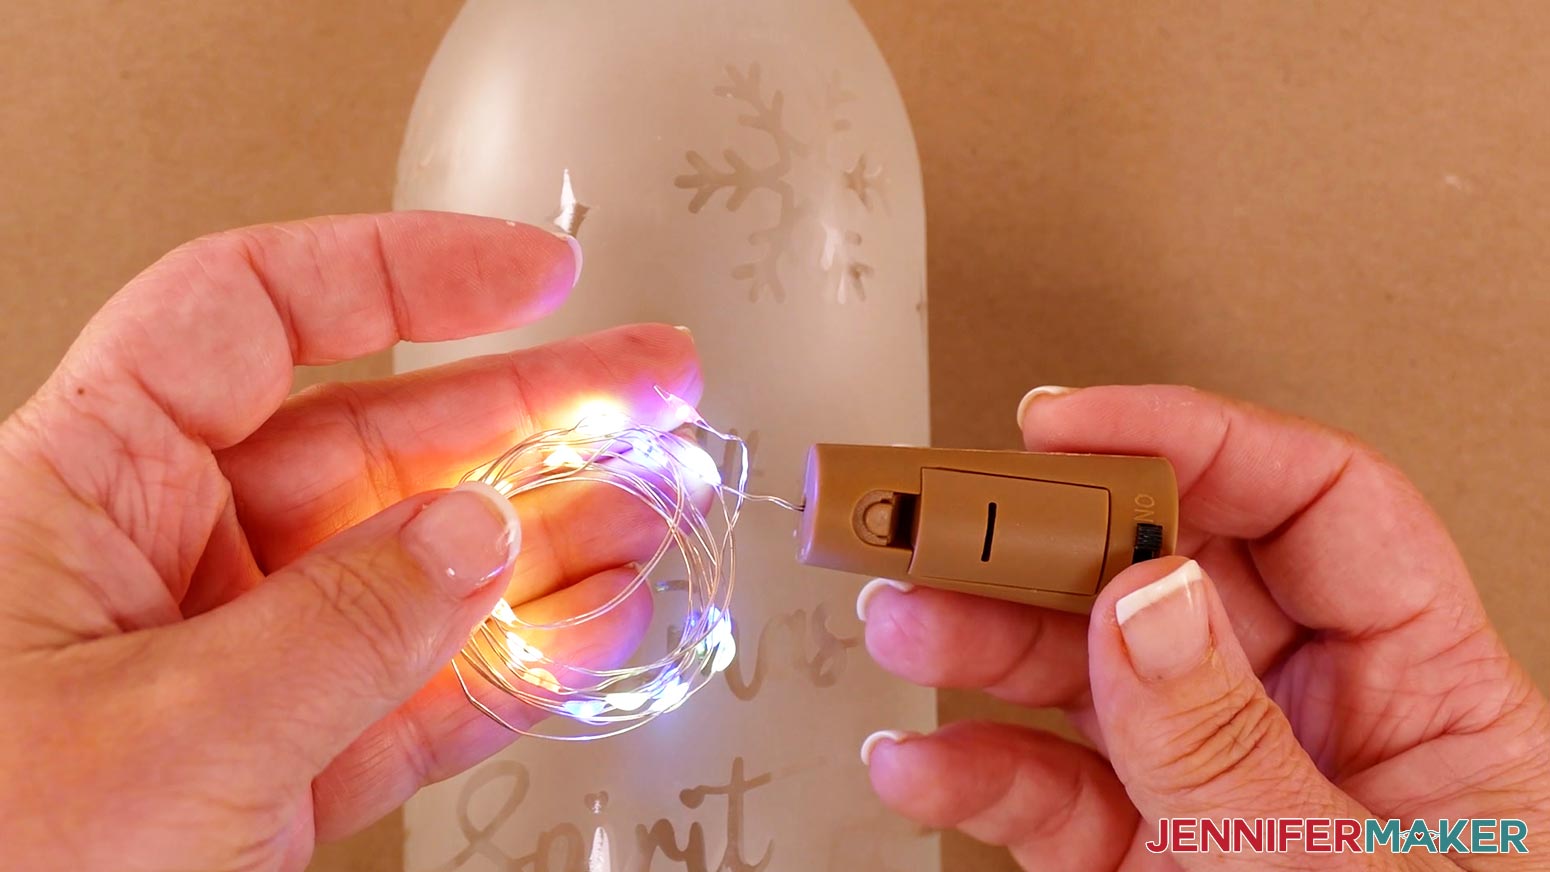 Turn on your wine bottle fairy lights to make sure they work using the switch on the cork-shaped topper. Remove the battery protector tab if there is one.